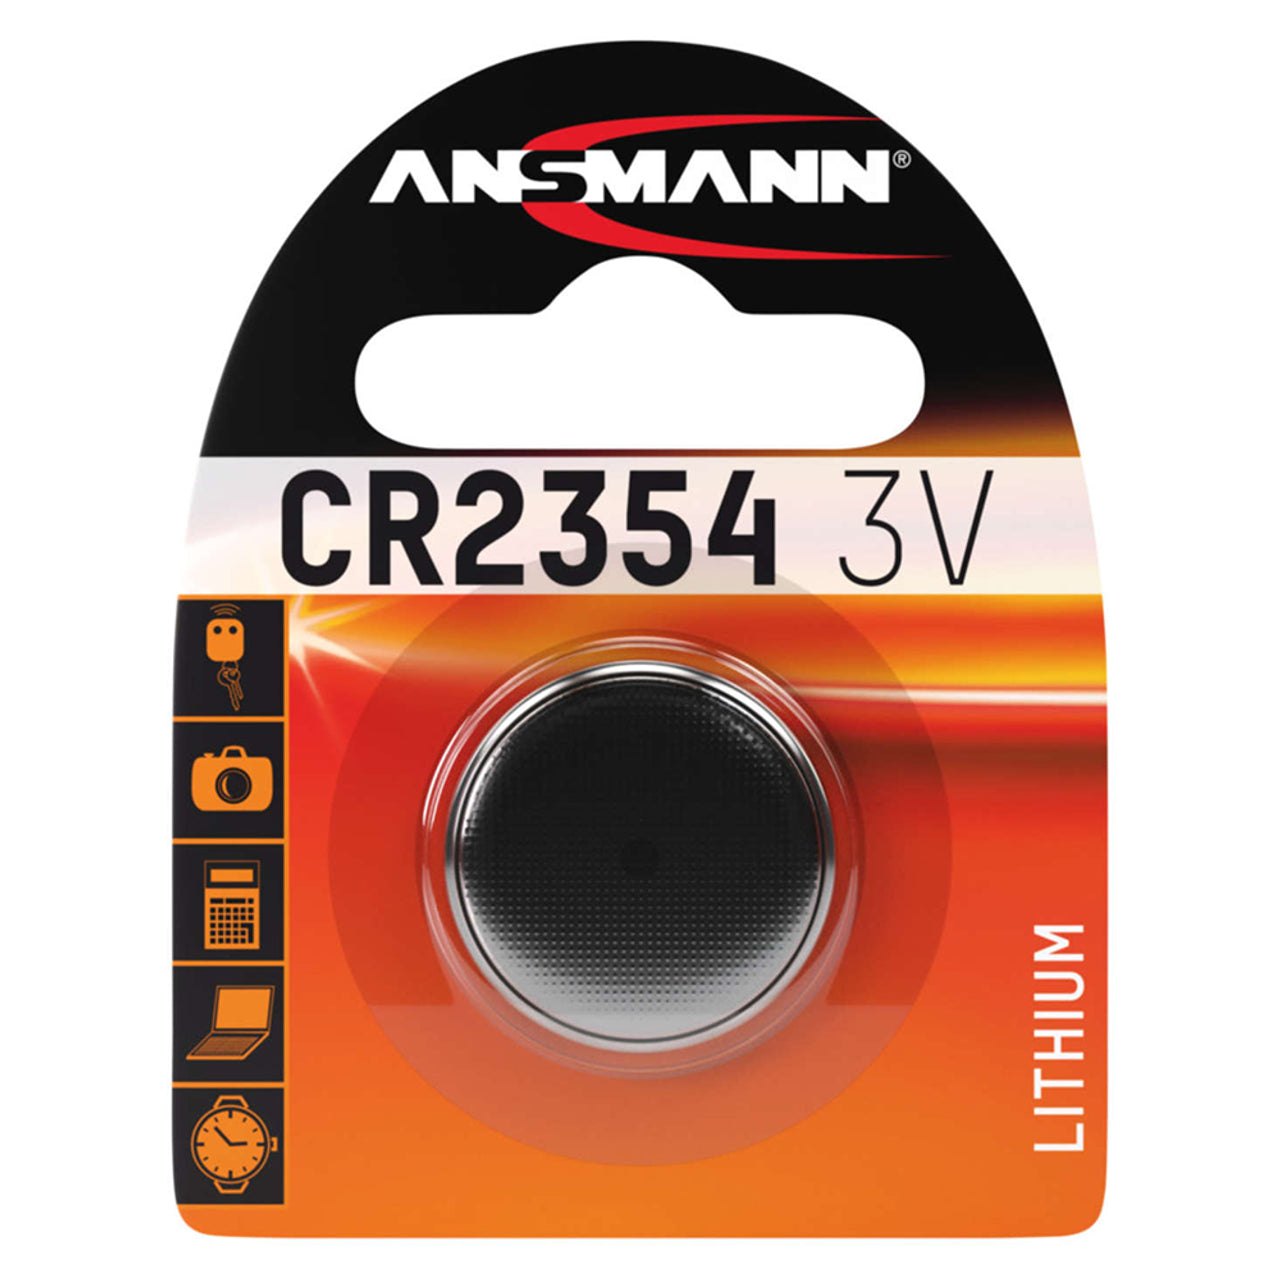 Product Image of Ansmann CR2354 3V Lithium Coin Cell Battery 2354, DL2354, BR2354, LM2354